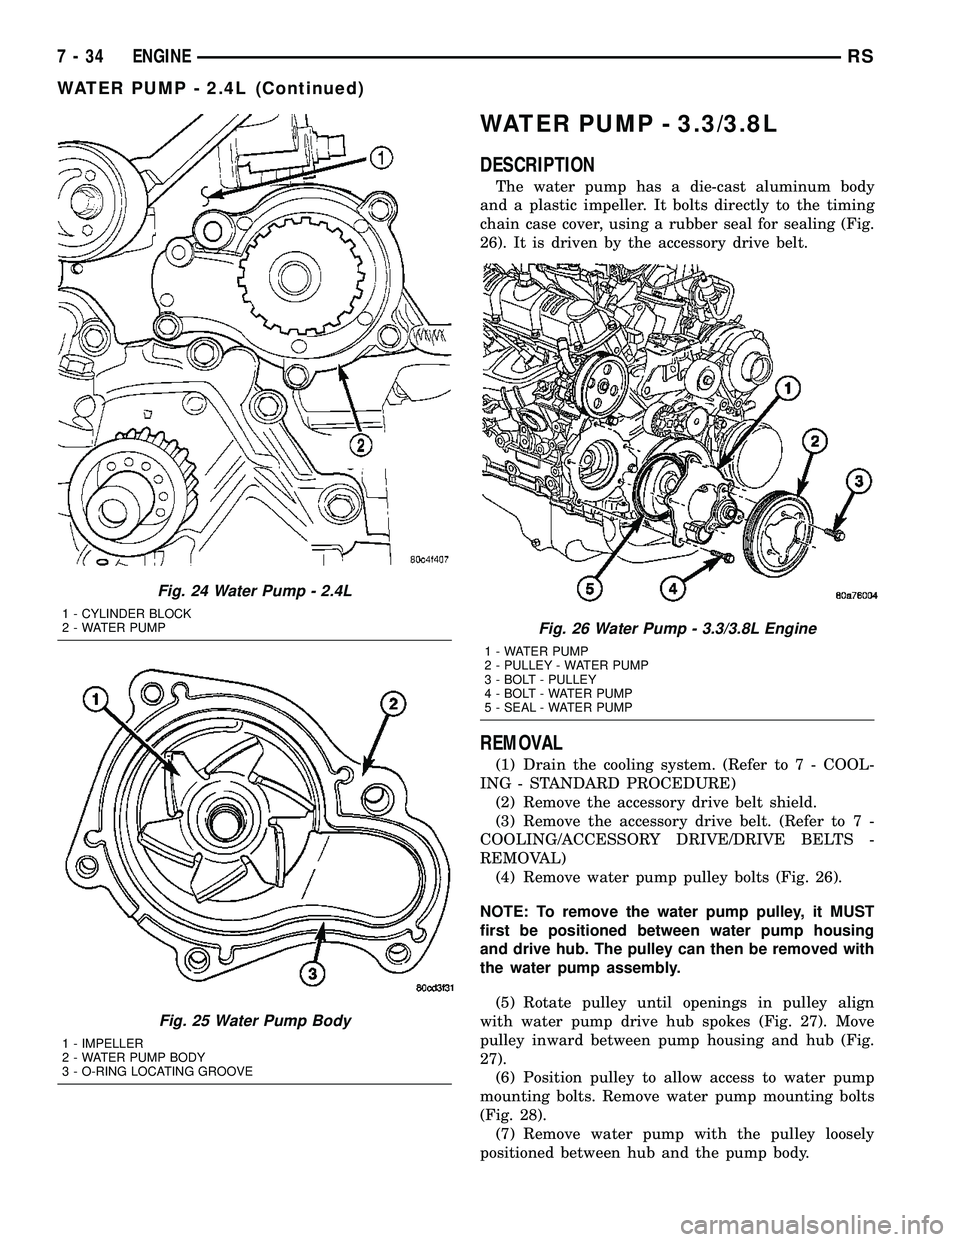 CHRYSLER CARAVAN 2005  Service Manual WATER PUMP - 3.3/3.8L
DESCRIPTION
The water pump has a die-cast aluminum body
and a plastic impeller. It bolts directly to the timing
chain case cover, using a rubber seal for sealing (Fig.
26). It is